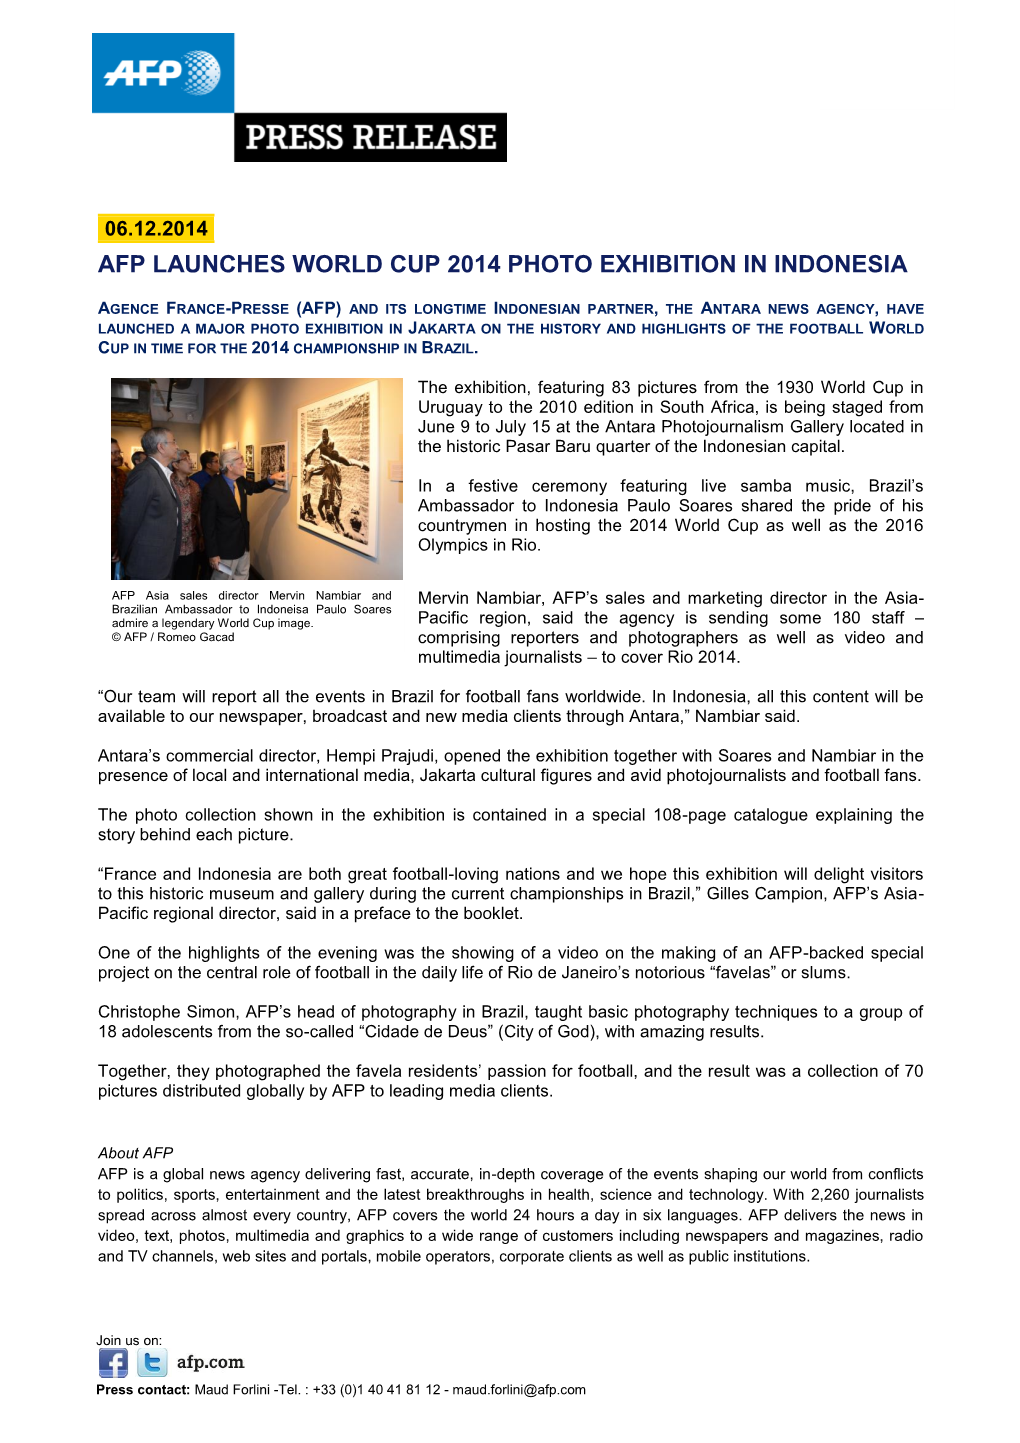 Afp Launches World Cup 2014 Photo Exhibition in Indonesia